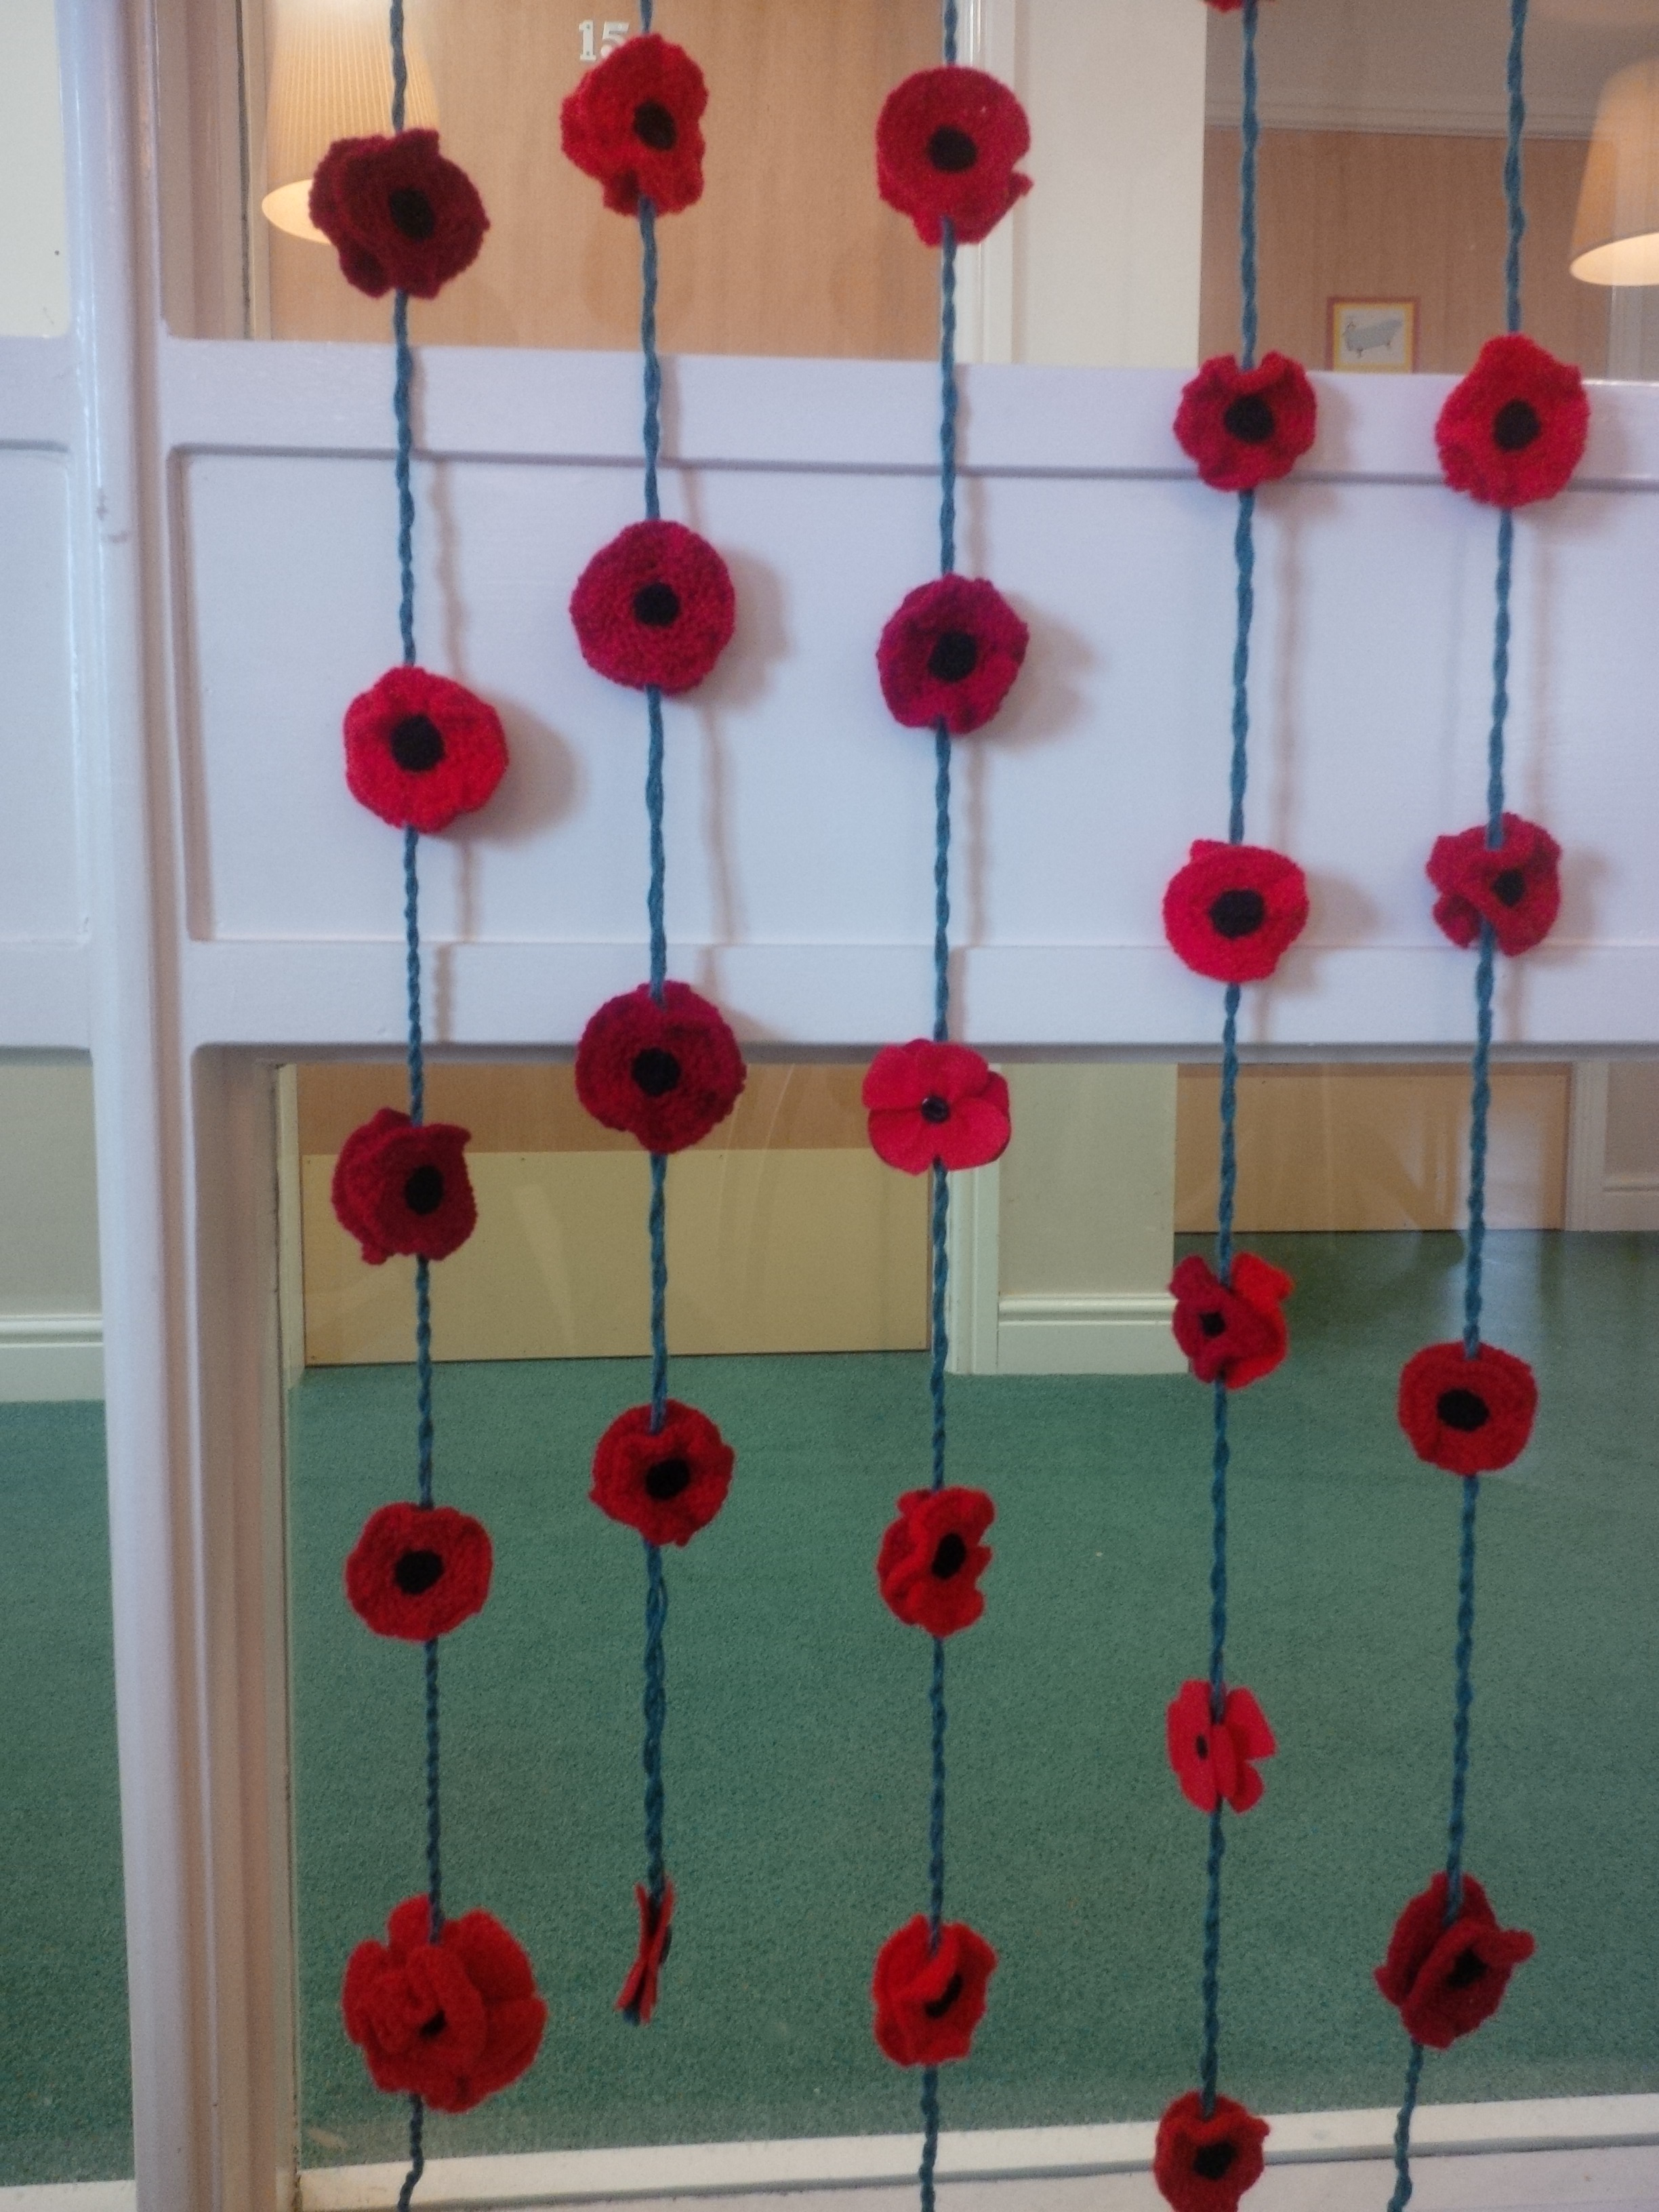 Four Seasons Care Centre Poppy Making: Key Healthcare is dedicated to caring for elderly residents in safe. We have multiple dementia care homes including our care home middlesbrough, our care home St. Helen and care home saltburn. We excel in monitoring and improving care levels.